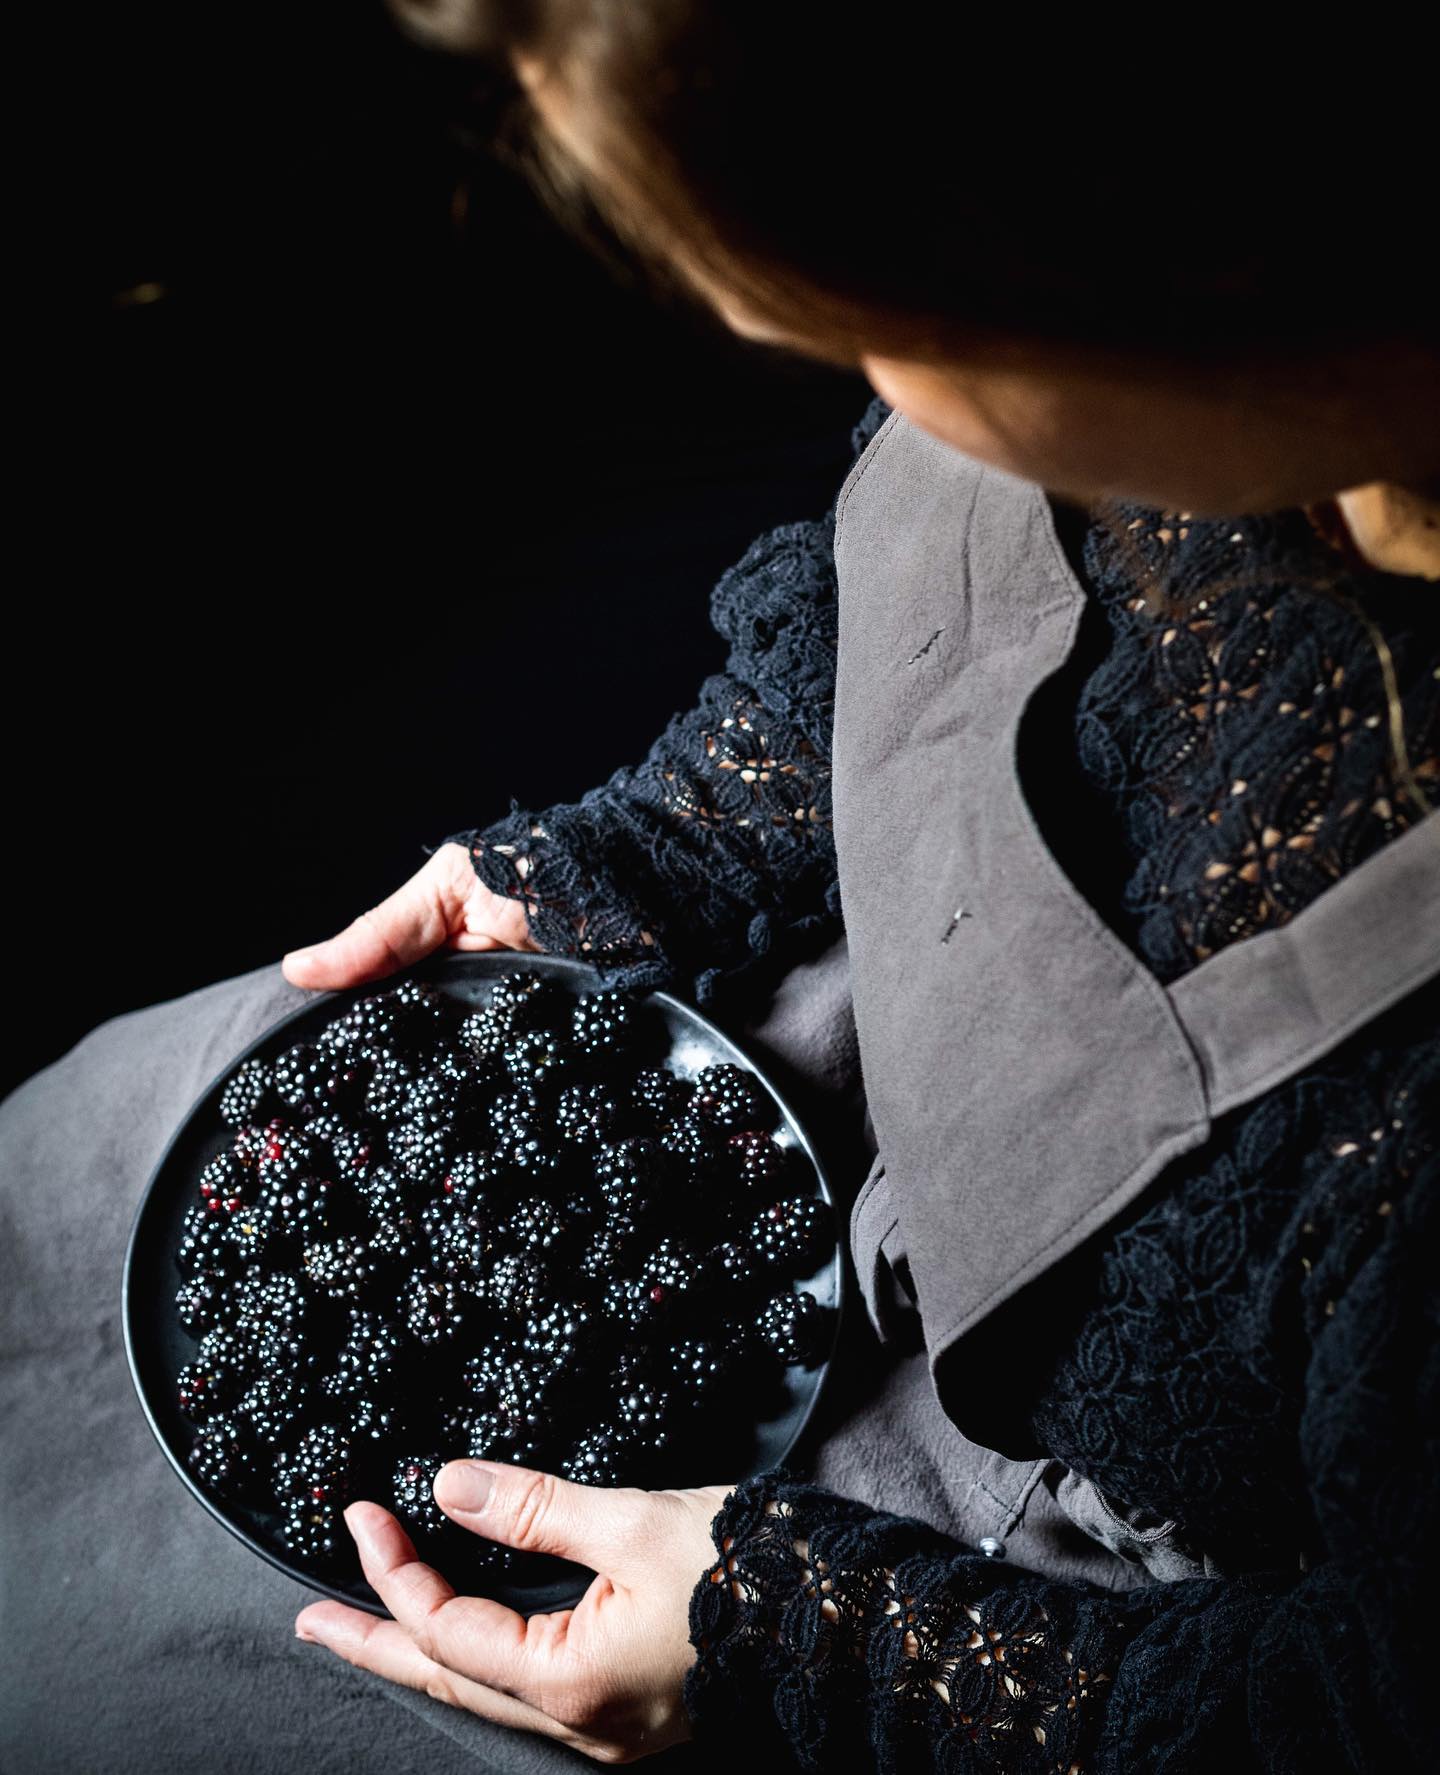 Blackberries 🖤 and just a simple moment captured on camera. 

Black is such a beautiful colour but also really tricky to shoot, and I wasn’t really sure how this picture would turn out. But now I’m really happy I tried - it was so much fun to experiment with the darker colours and the light 🖤

My entry to the February challenge Hero the colour black by @foodartproject @thesouthasiankitchen judged by @twiggstudios with prizes by @fifbackgrounds @organized.ceramics 

#foodphotography #foodstyling #foodshot #tastingtable #foodtographyschool #foodfluffer #tohfoodie #foodart #foodartblog #cuisine_creations #cuisine_captures #beautifulcuisines #shareyourtable #still_life_gallery_ #still_life_gallery #still_life_photography #thatsdarling #eatprettythings #myquietbeauty #aslowmoment #rusticstyle #cottagecore #moodygram #aseasonalshift #produceisbeautiful #mypinterest #foodartproject #foodartaimeeproject #hautecuisines #foodphotographyandstyling